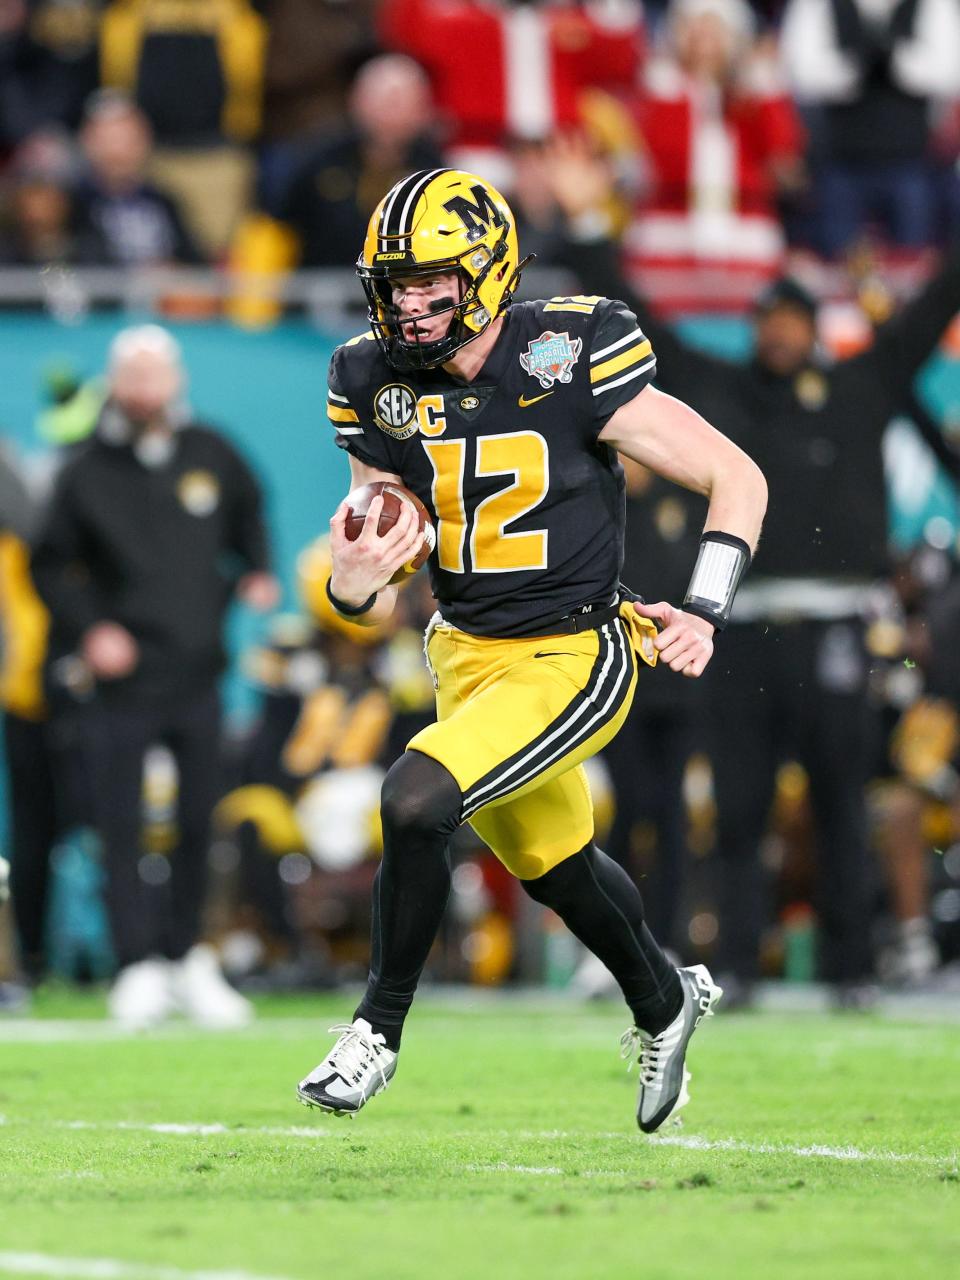 Missouri Tigers quarterback Brady Cook (12) runs with the ball against the Wake Forest Demon Deacons in the second quarter in the 2022 Gasparilla Bowl at Raymond James Stadium.